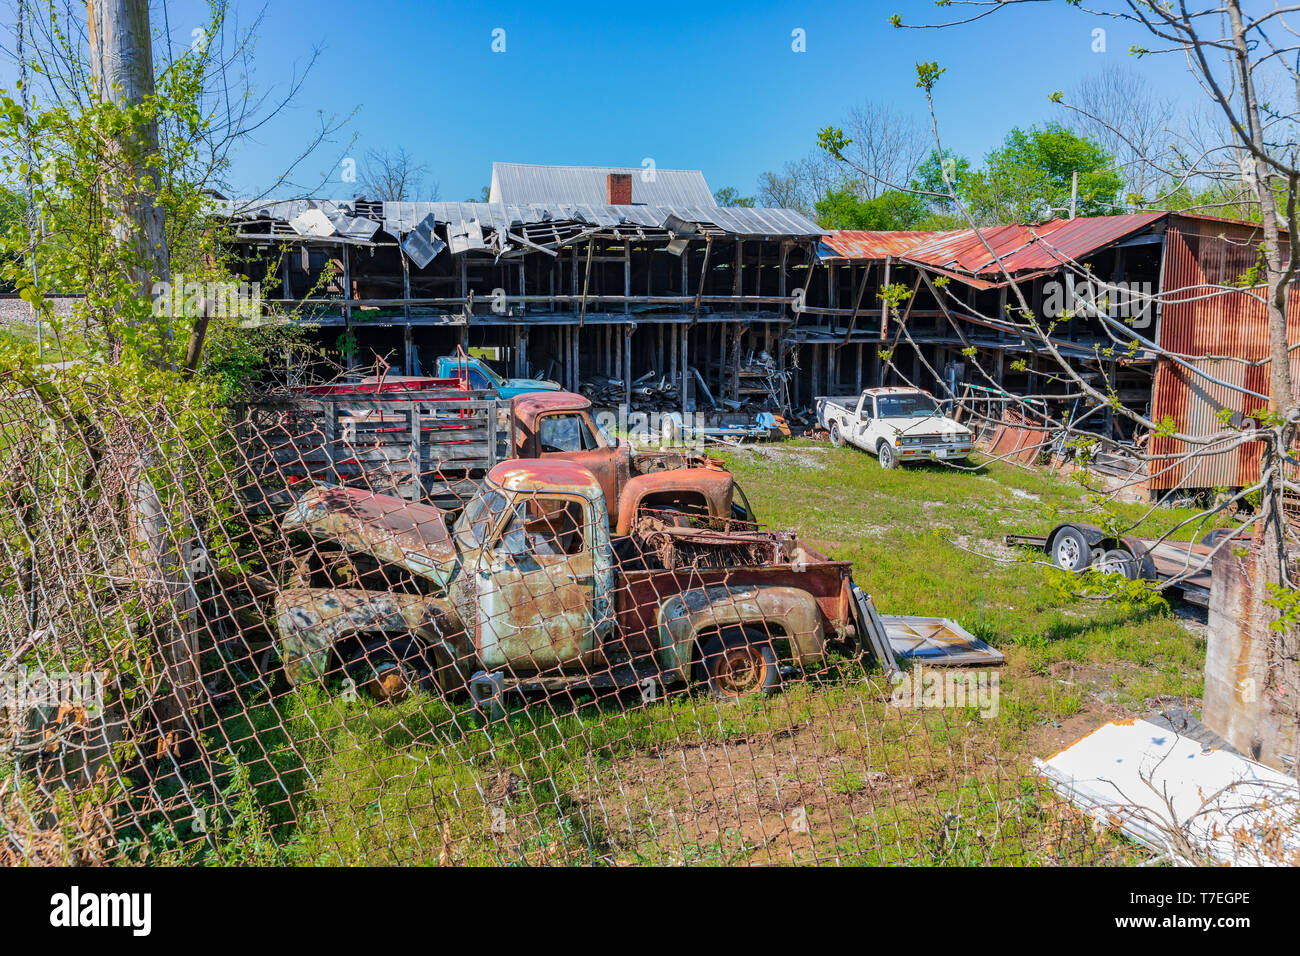 LIMESTONE, TN, USA-4/27/19:  A fenced yard containing junked antique trucks and cars, and a dilapidated building. Stock Photo